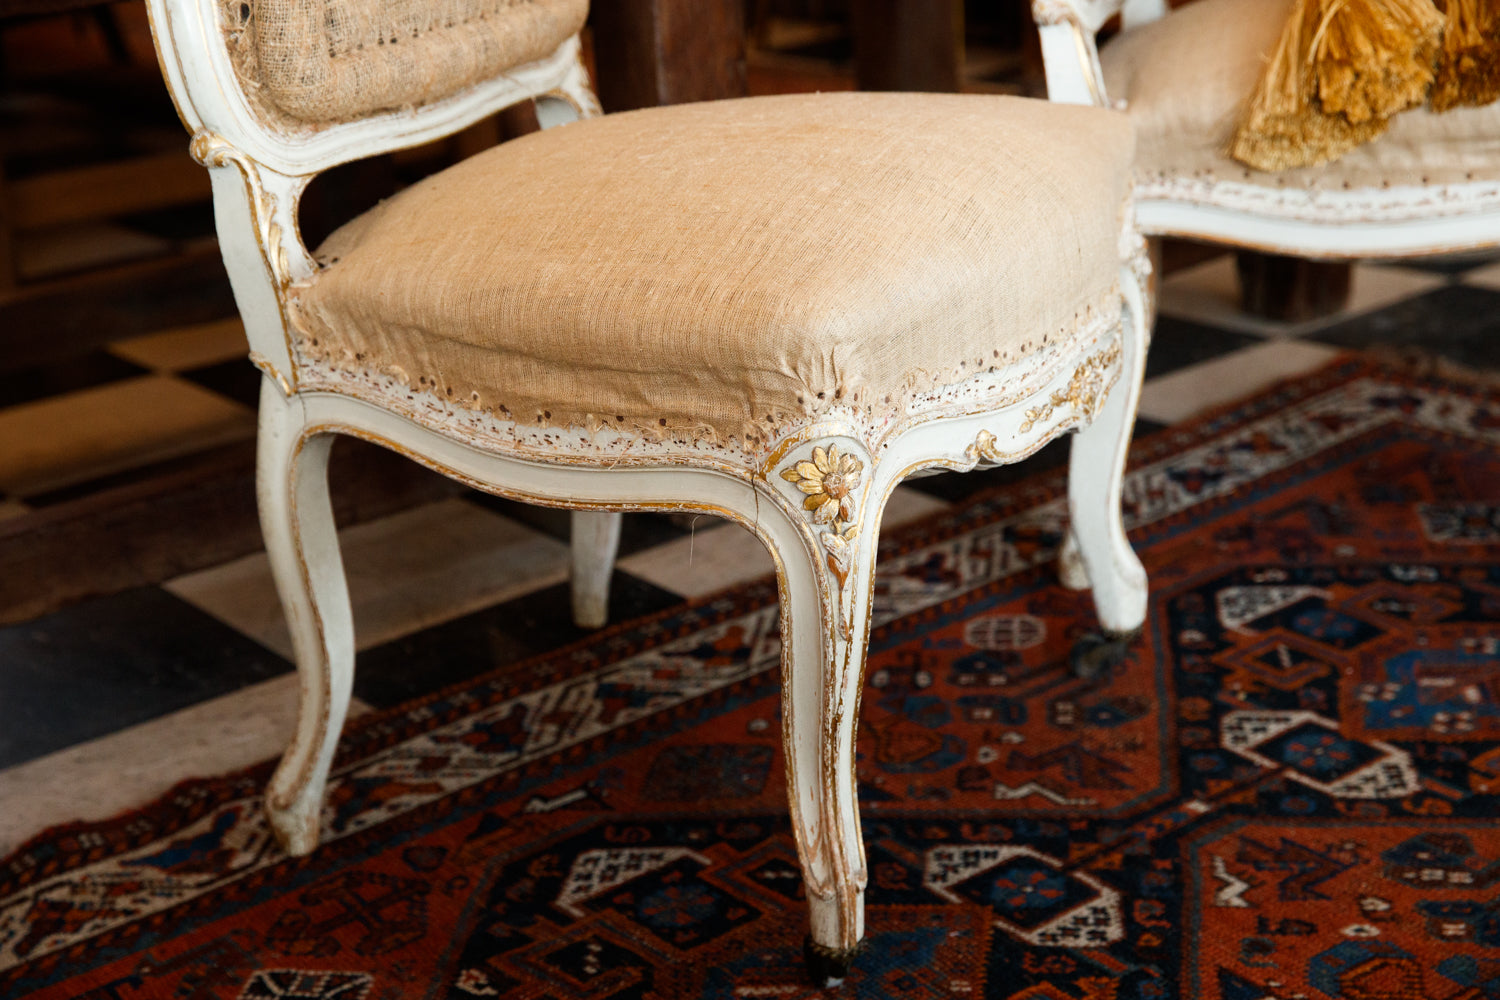 19th Century Undressed French Chairs